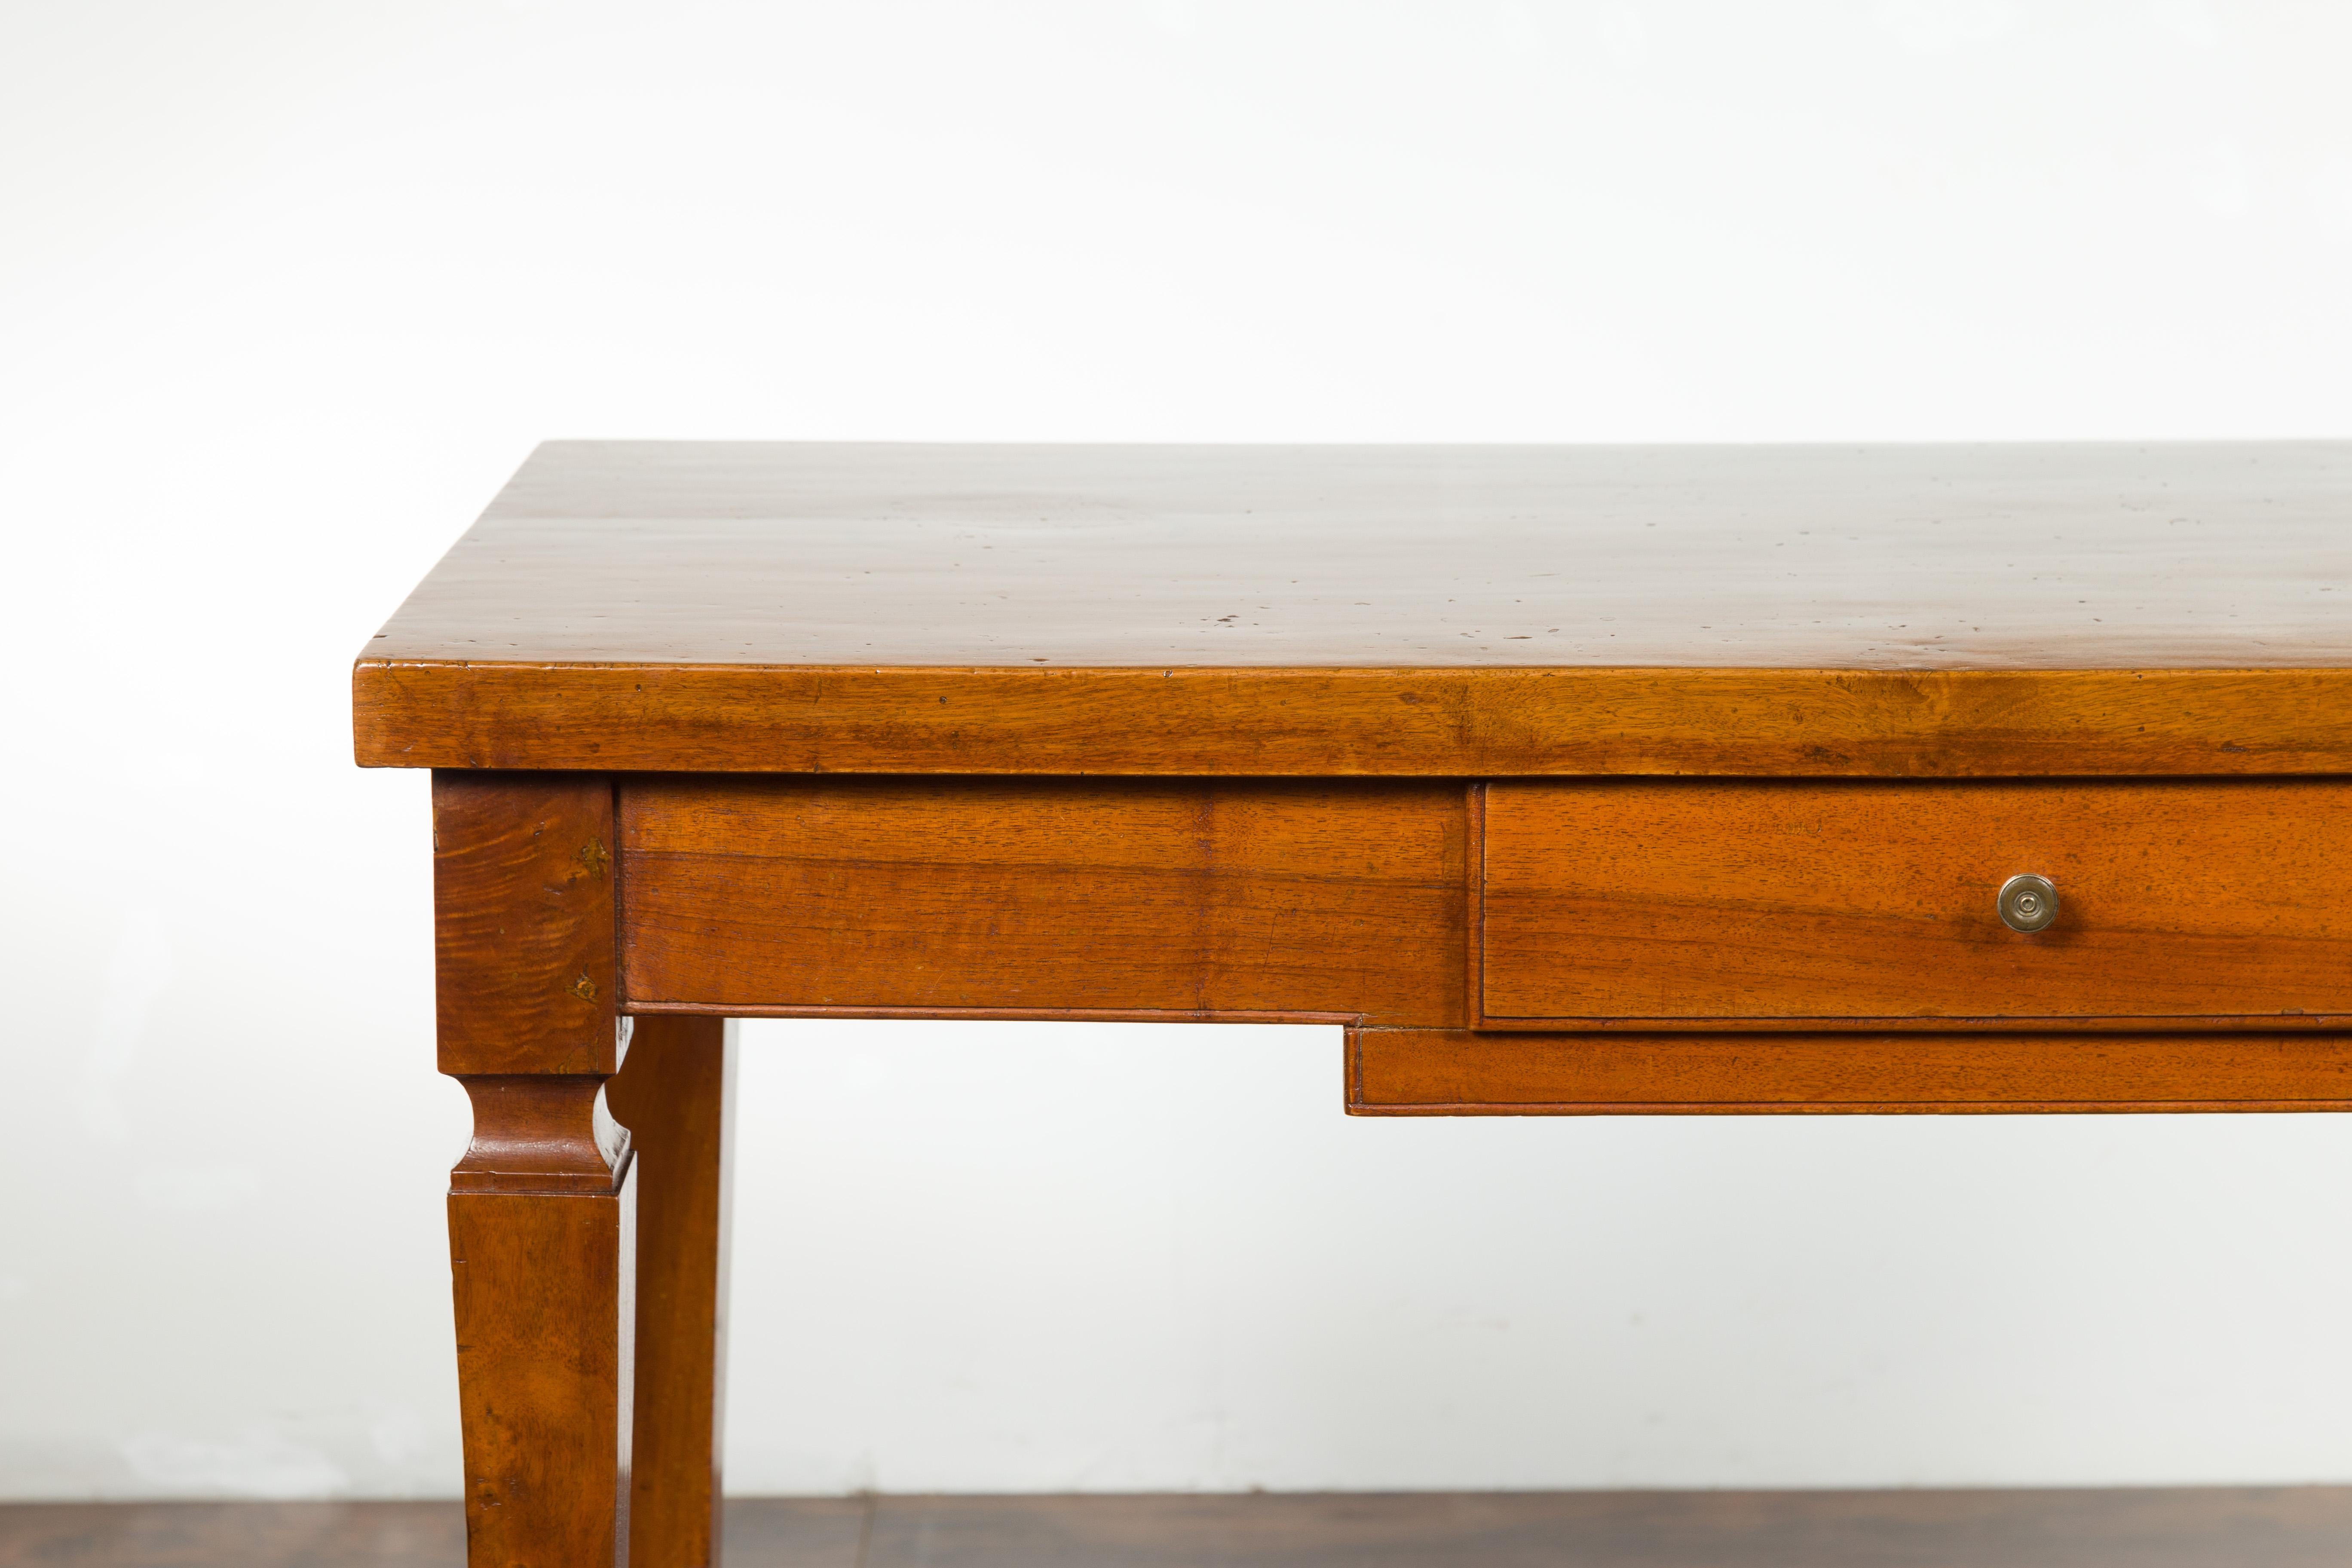 Italian 19th Century Walnut Desk with Single Drawer and Tapered Legs For Sale 1